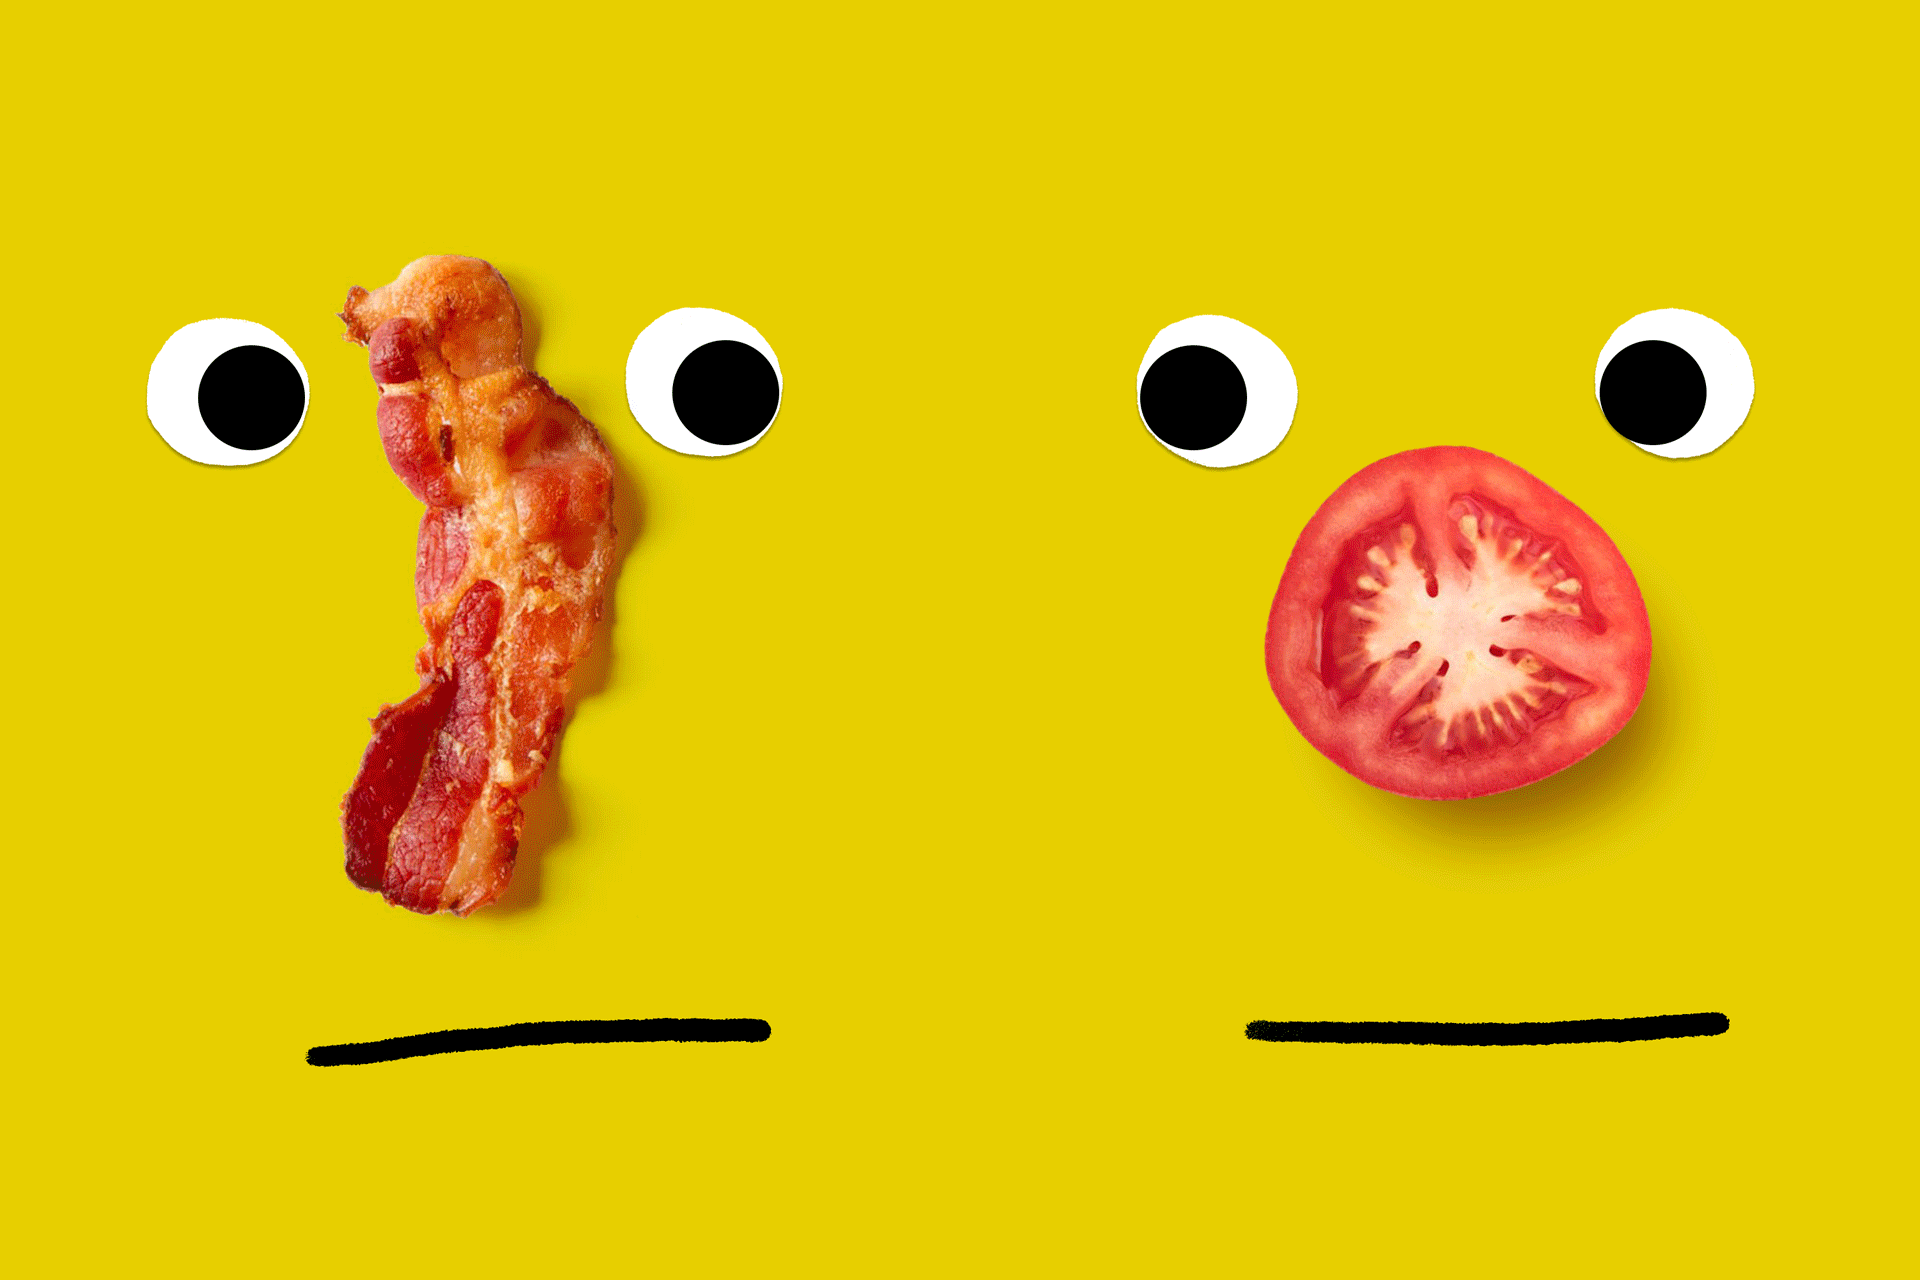 Two sets of eyes and mouths with noses represented by changing foods.